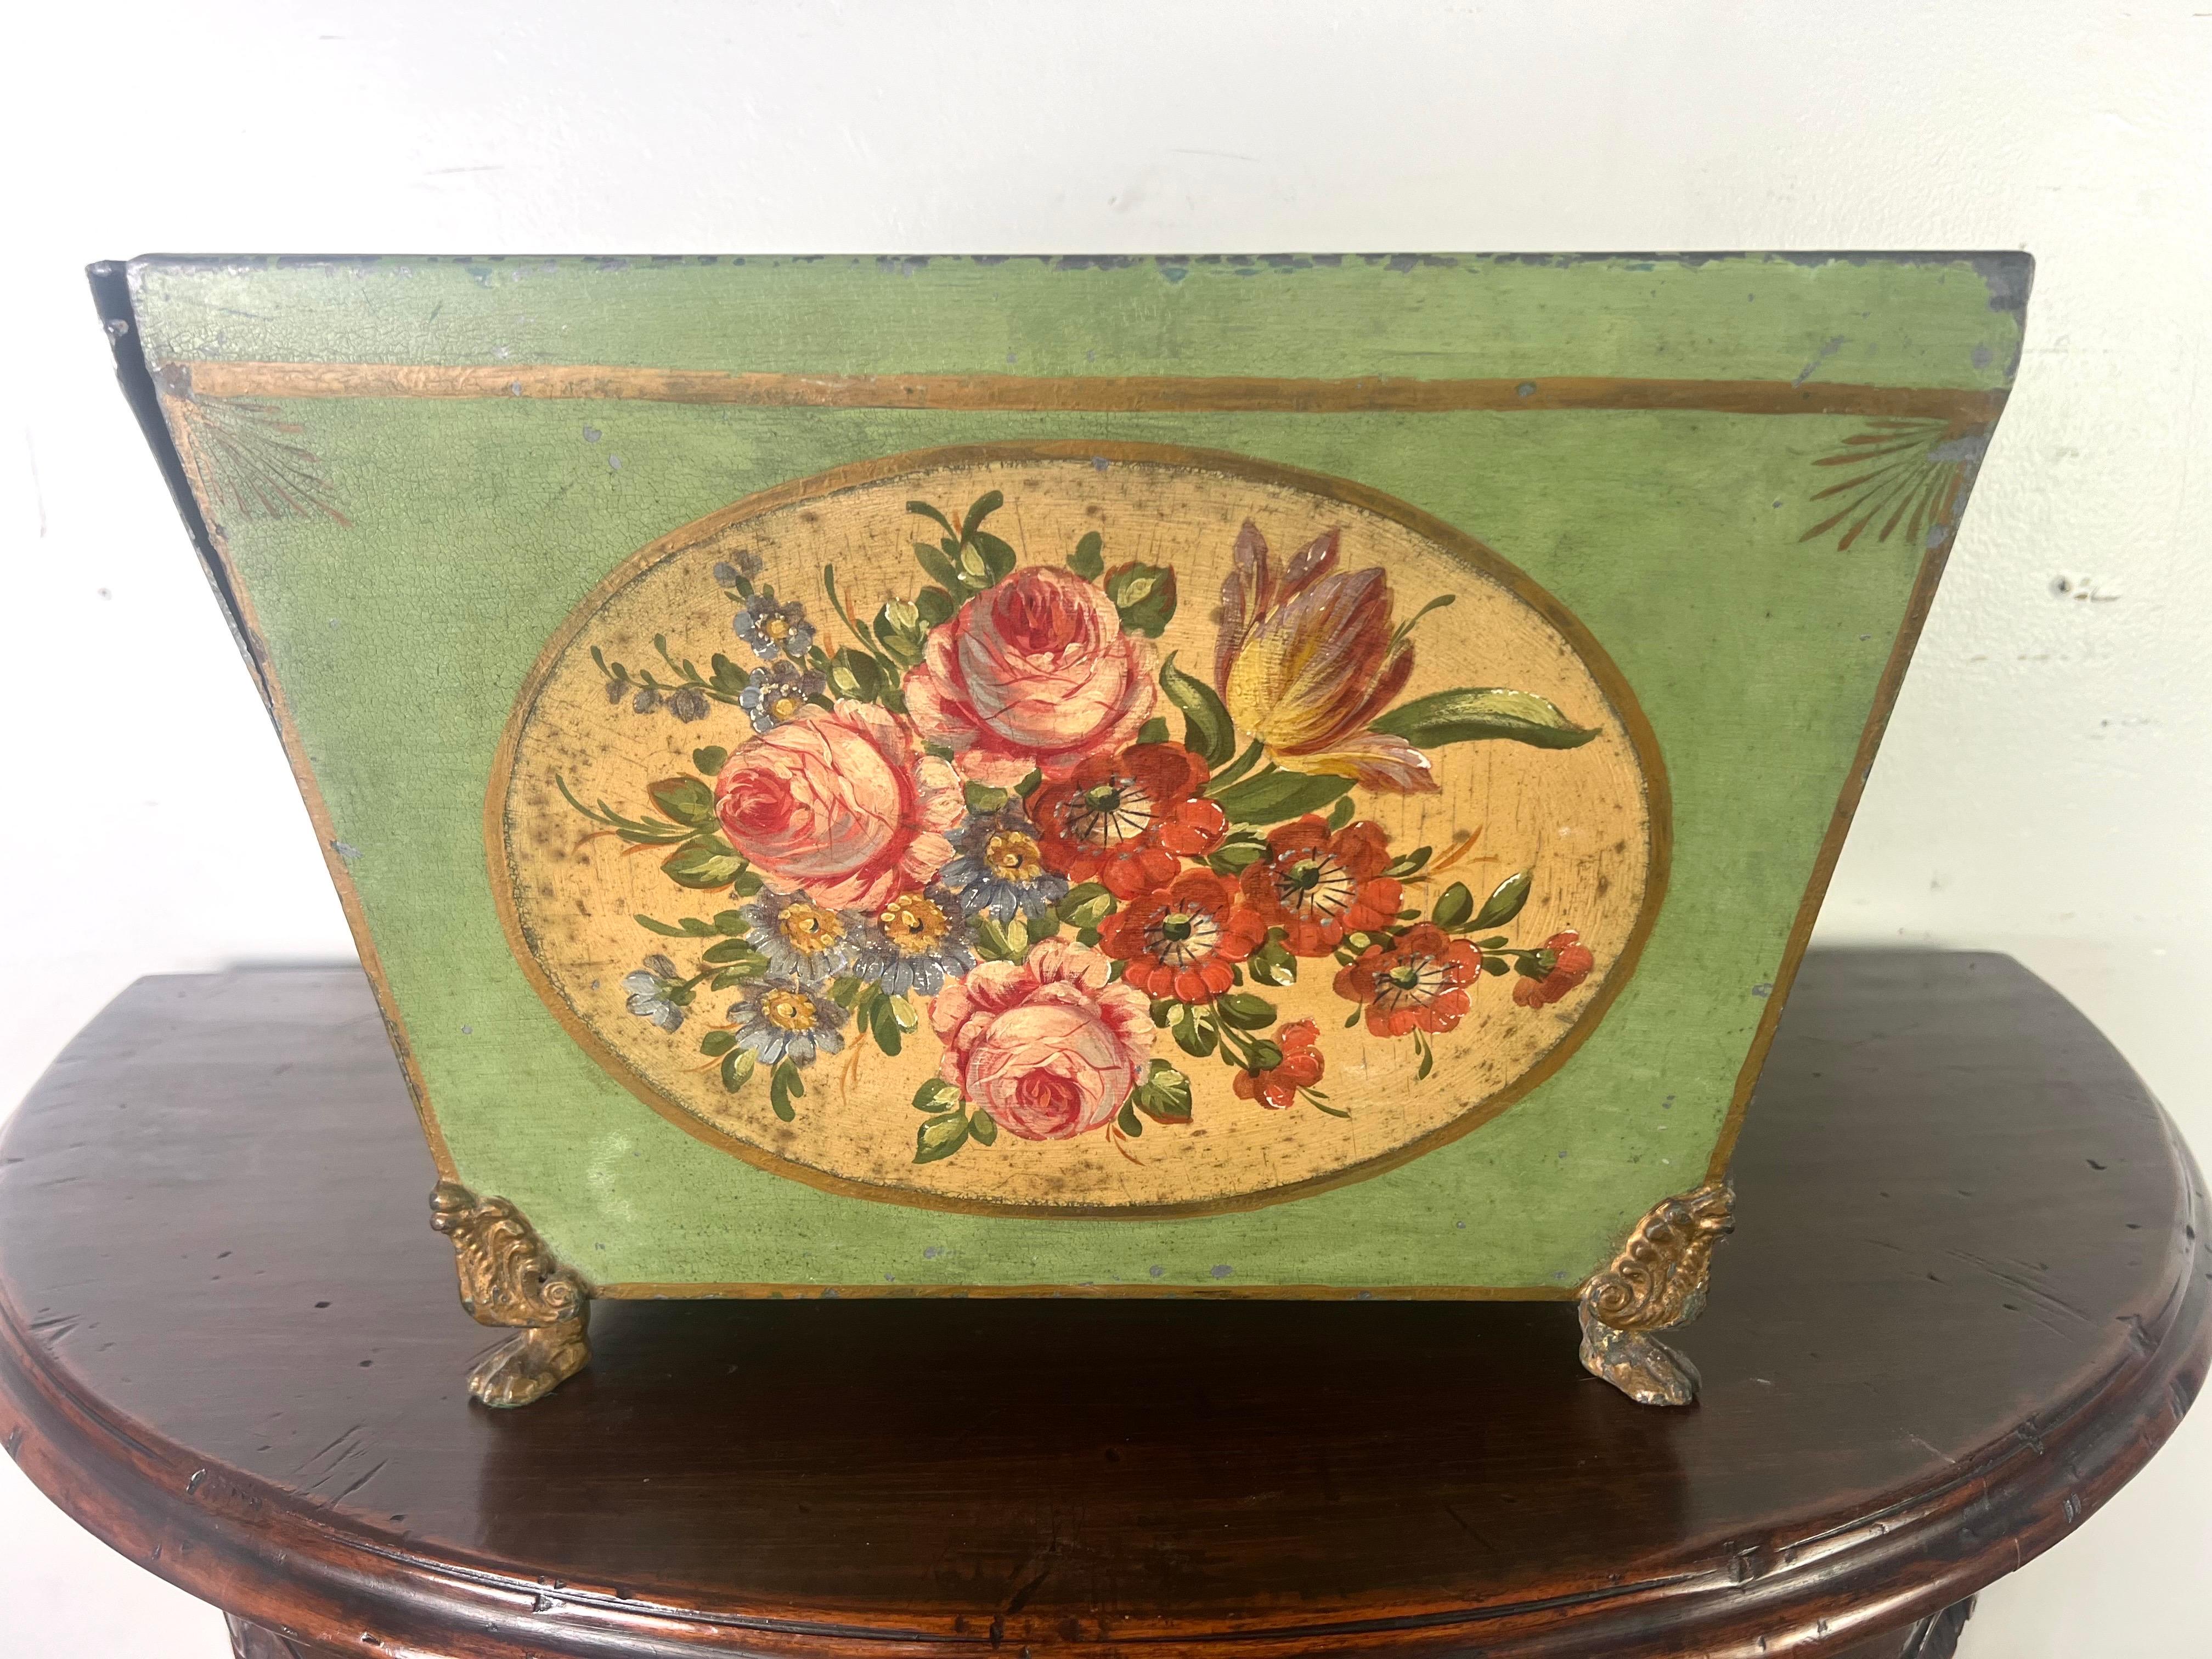 19th-century French tole container.  It features a trapezoidal shape and stands on four ornate brass feet with acanthus leaf motifs.  The main body is adorned with a bouquet of flowers painted in a palette of gold, reds, yellows, pinks, glues and